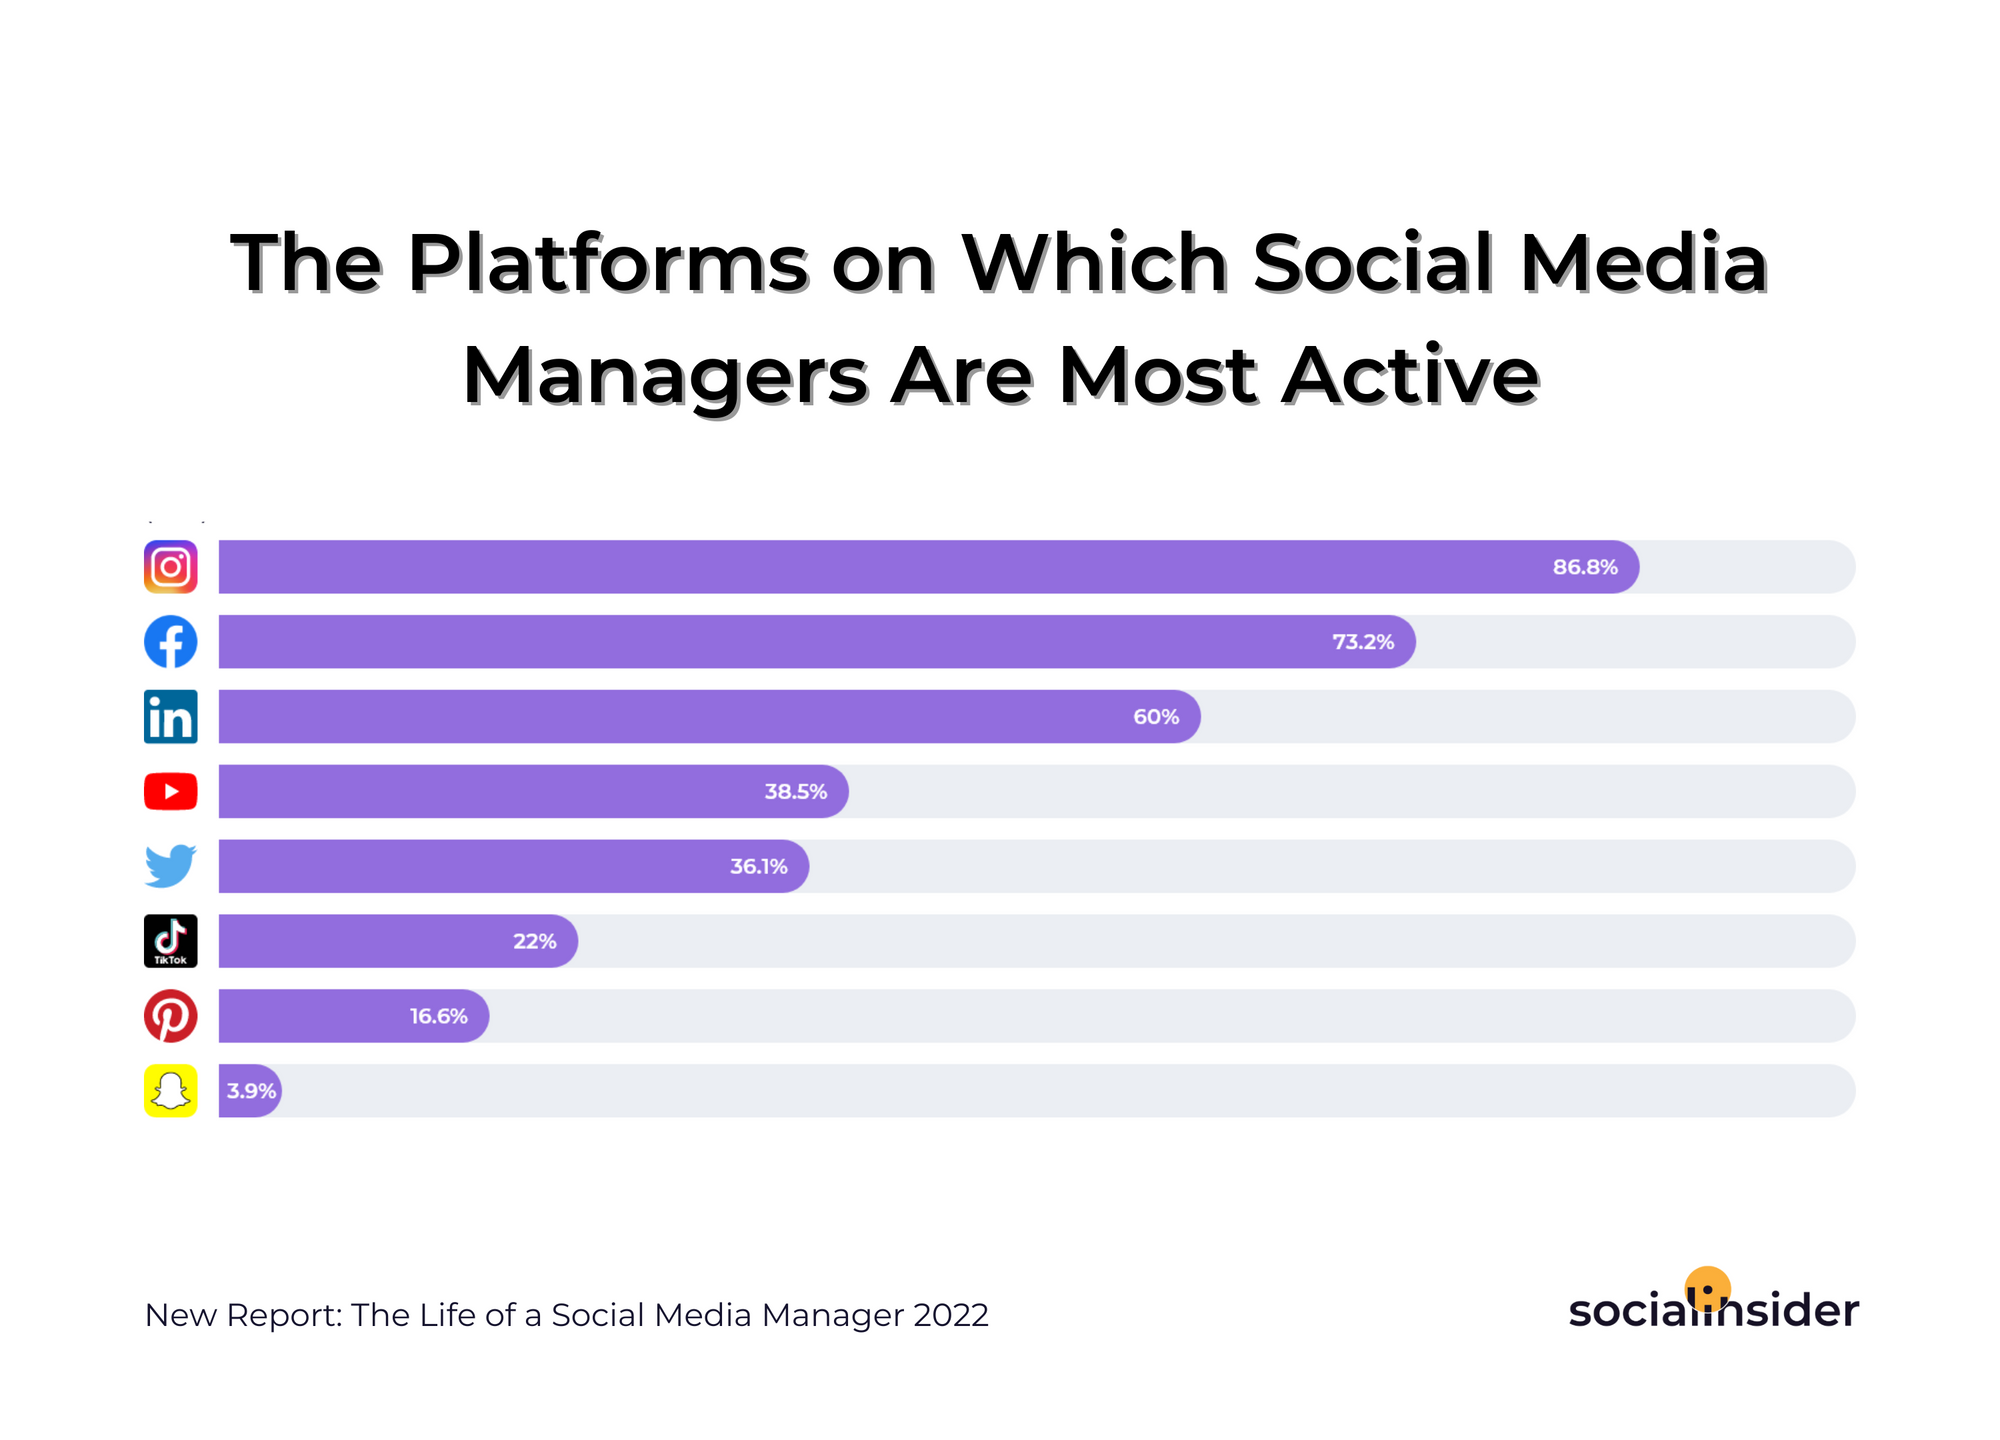 This is a graph containing the platforms on which social media managers are most active